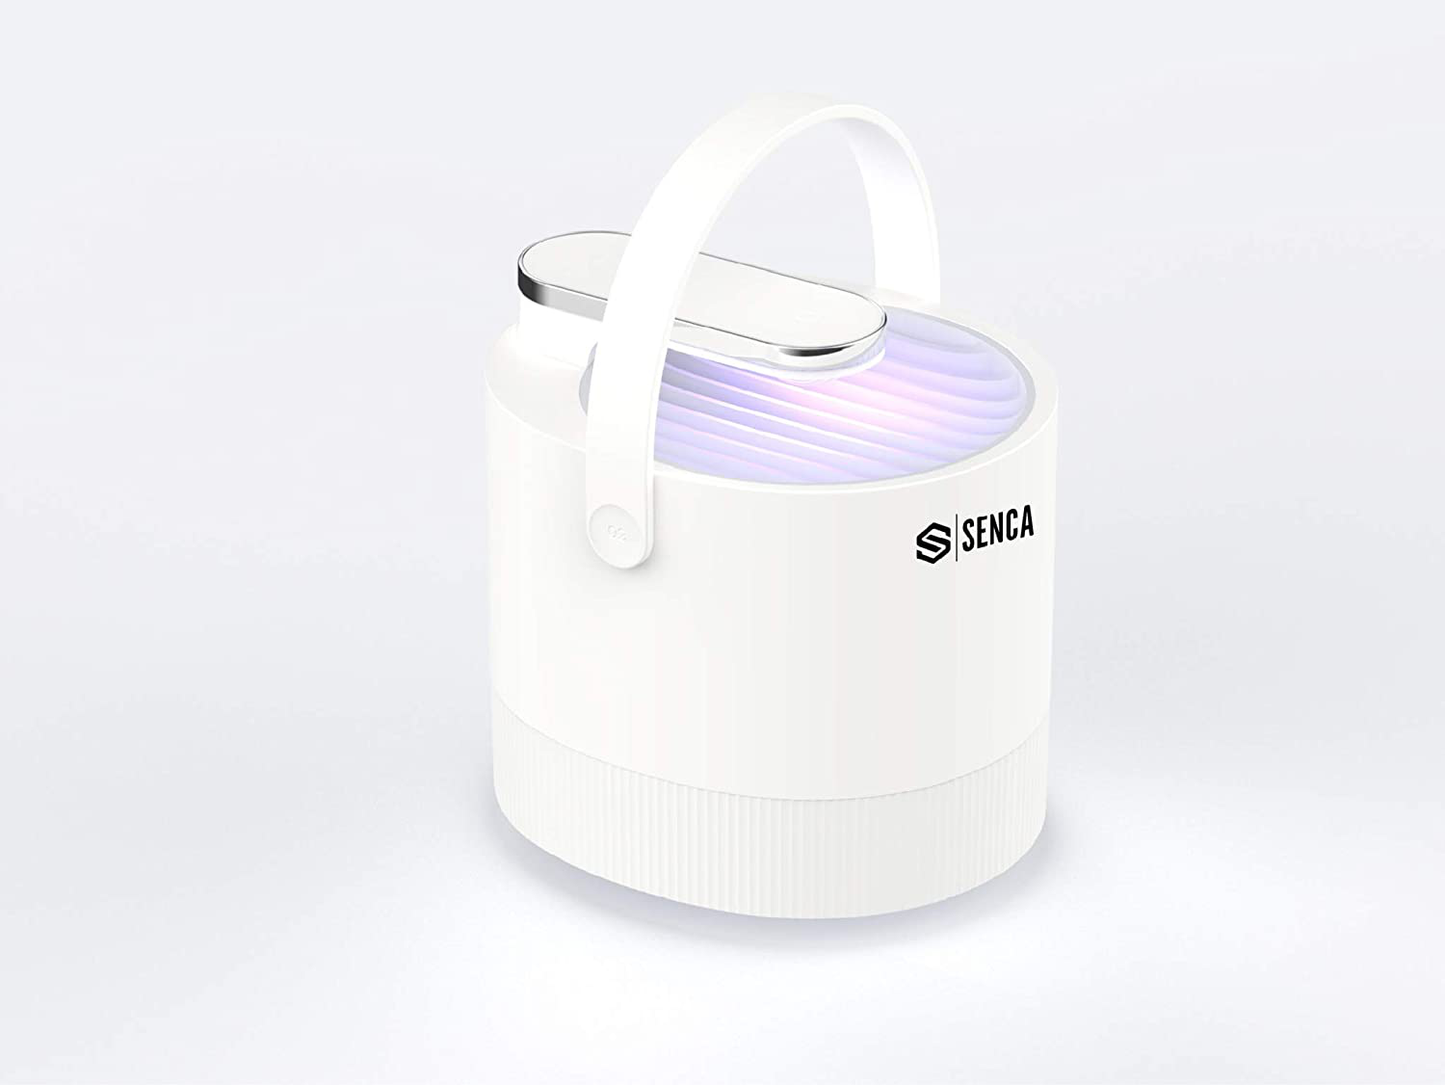 SENCA Indoor Outdoor Insect Trap, Bug, Fruit Fly, Gnat, Mosquito Killer Lamp, USB Plug-in with Adapter and 10 Sticky Glue Board, Suction Fan, No Zapper, Child Safe (White)